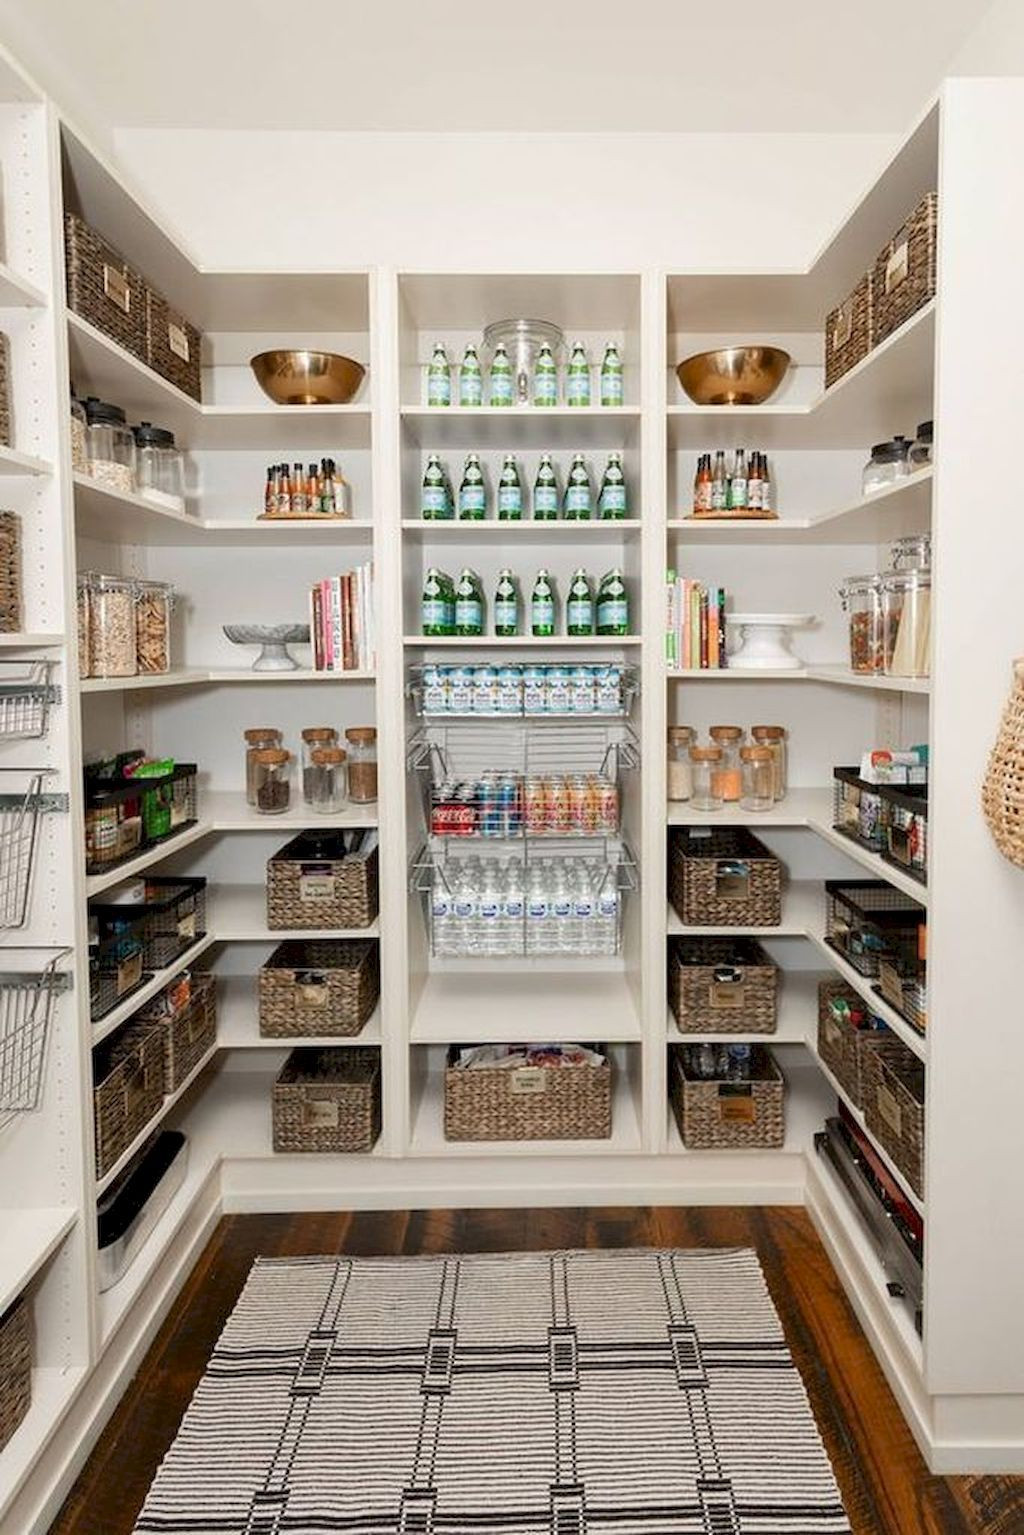 Pinterest Kitchen Organization
 7 Pantry Concepts to Assist You Set up Your Kitchen in